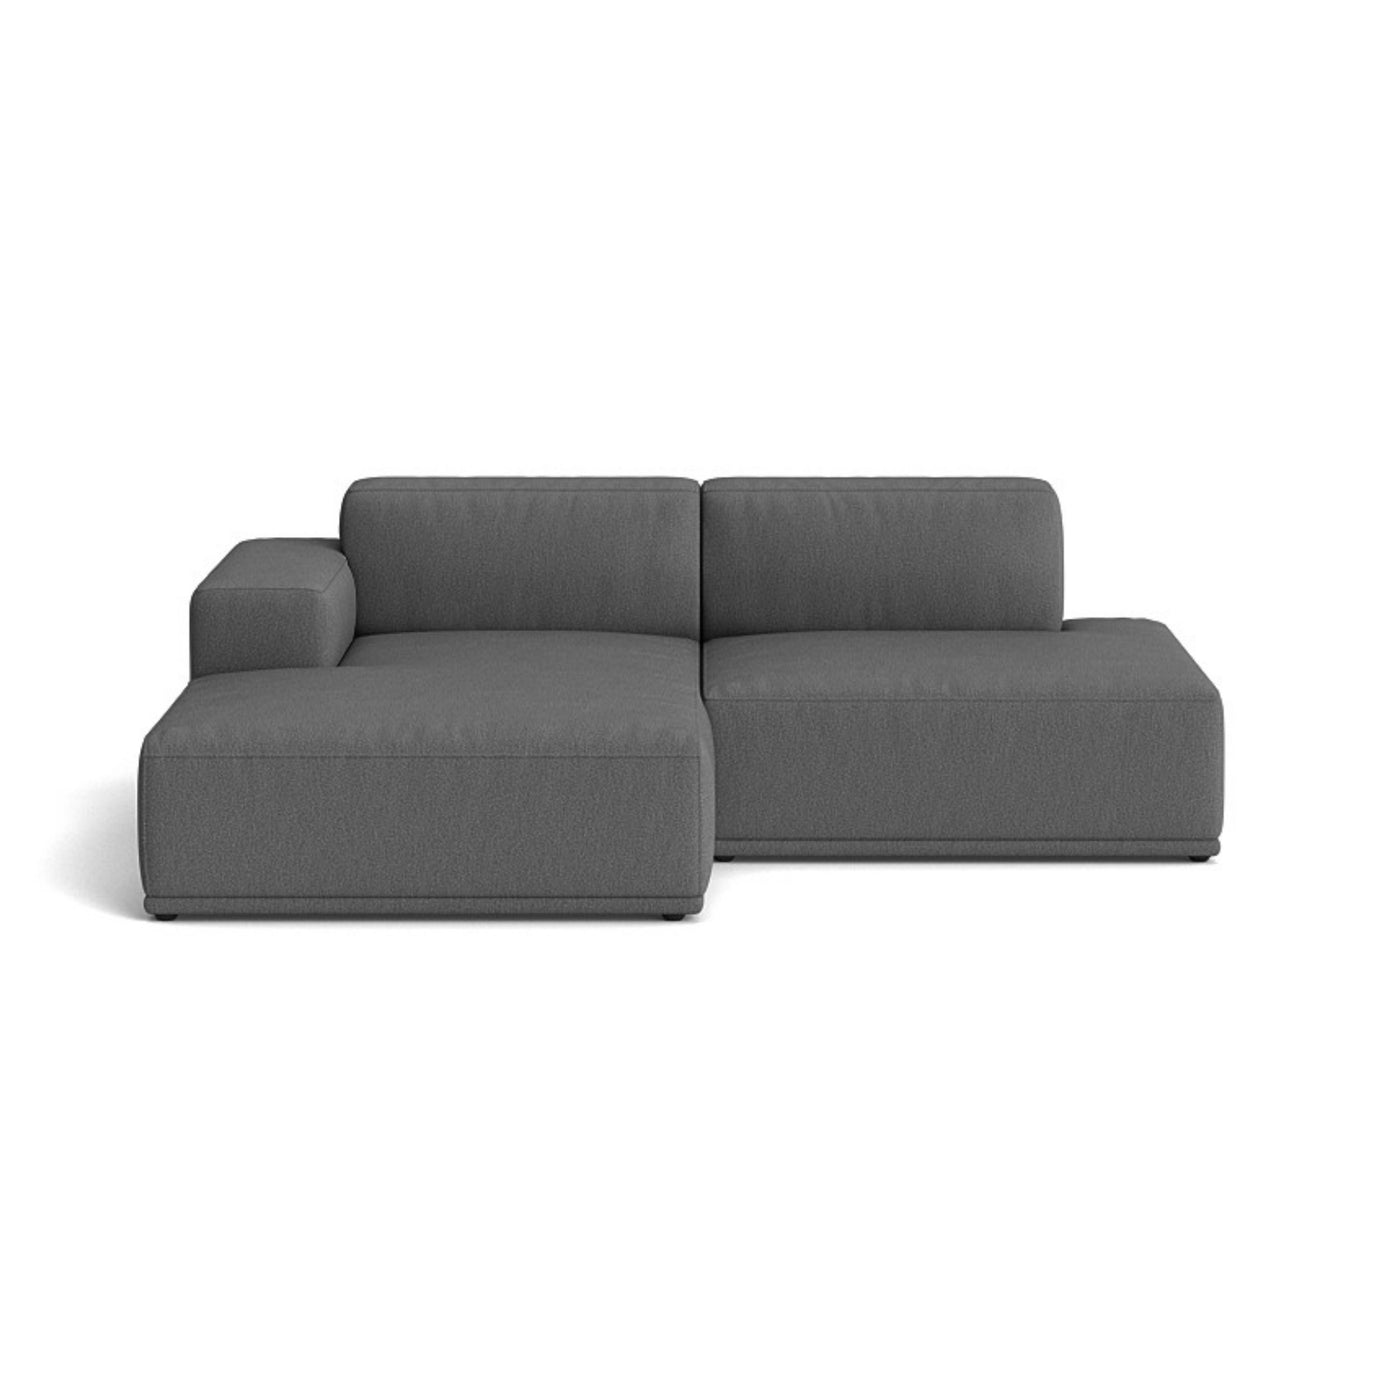 Muuto Connect Soft Modular 2 Seater Sofa, configuration 3. made-to-order from someday designs. #colour_clay-13